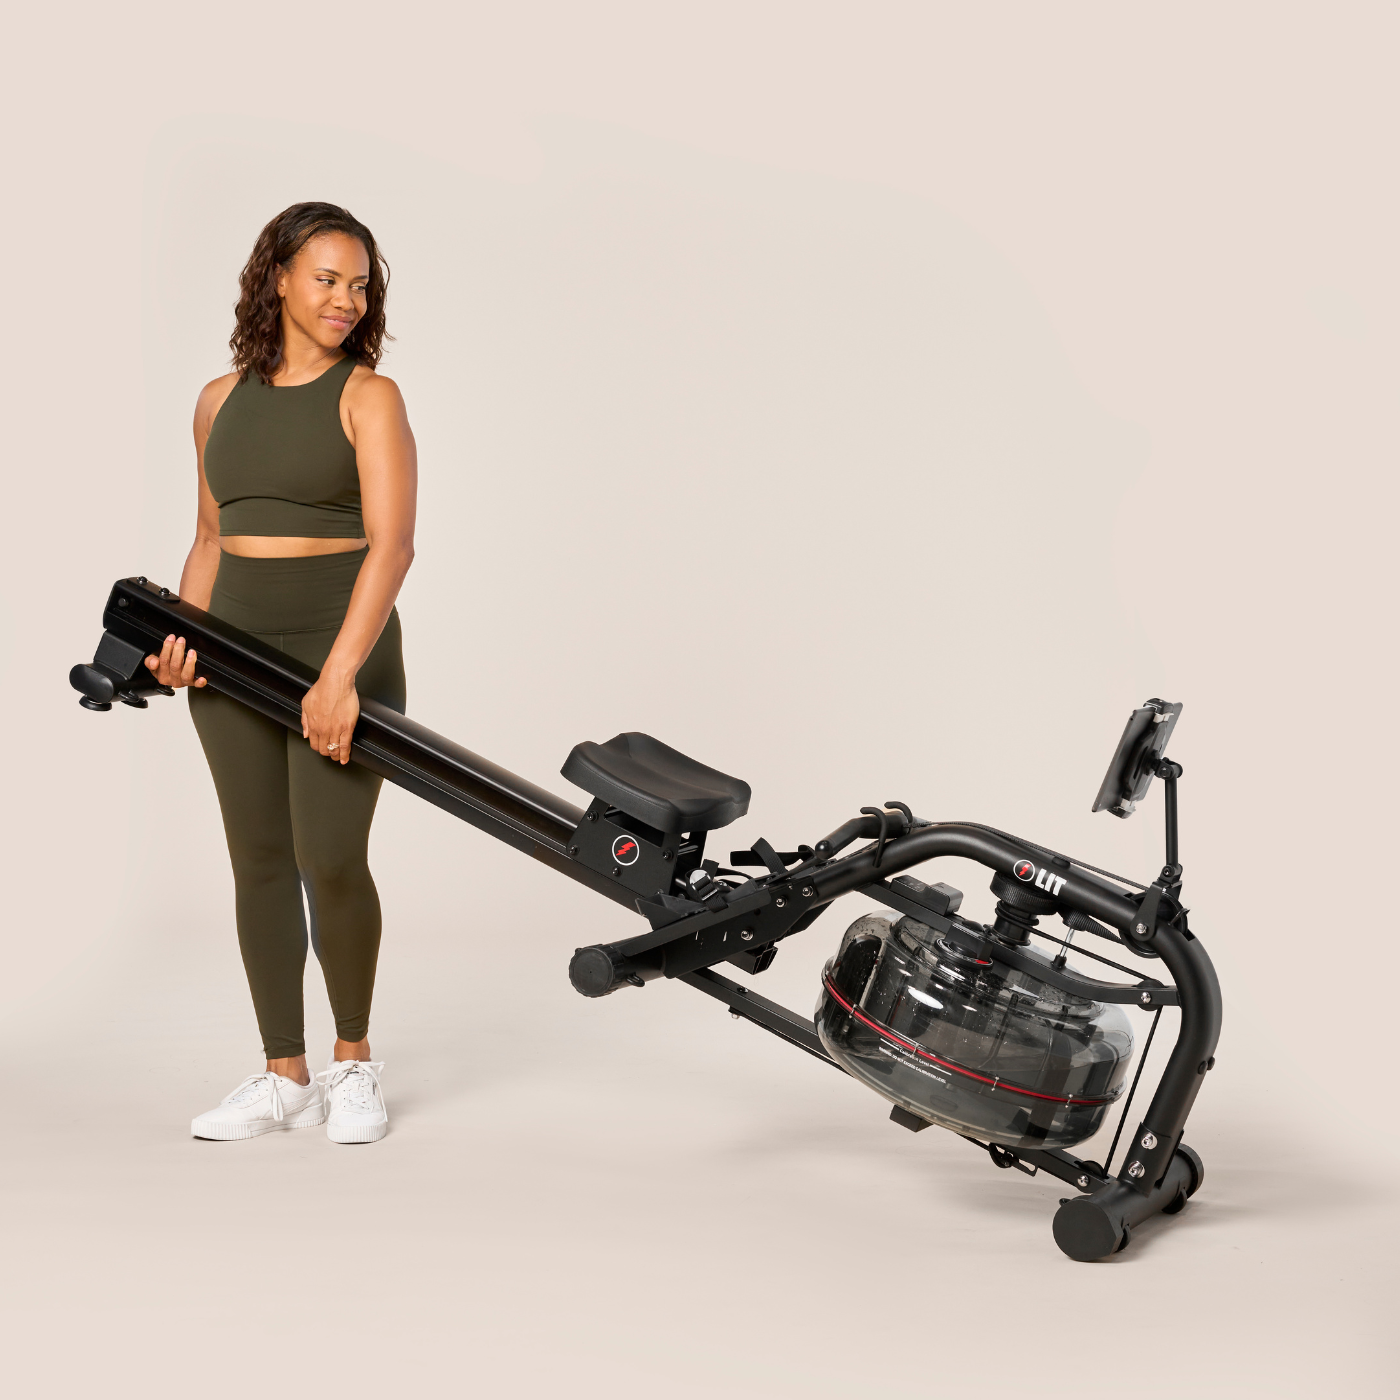 LIT Strength Machine - Plus Pack Save over $800!